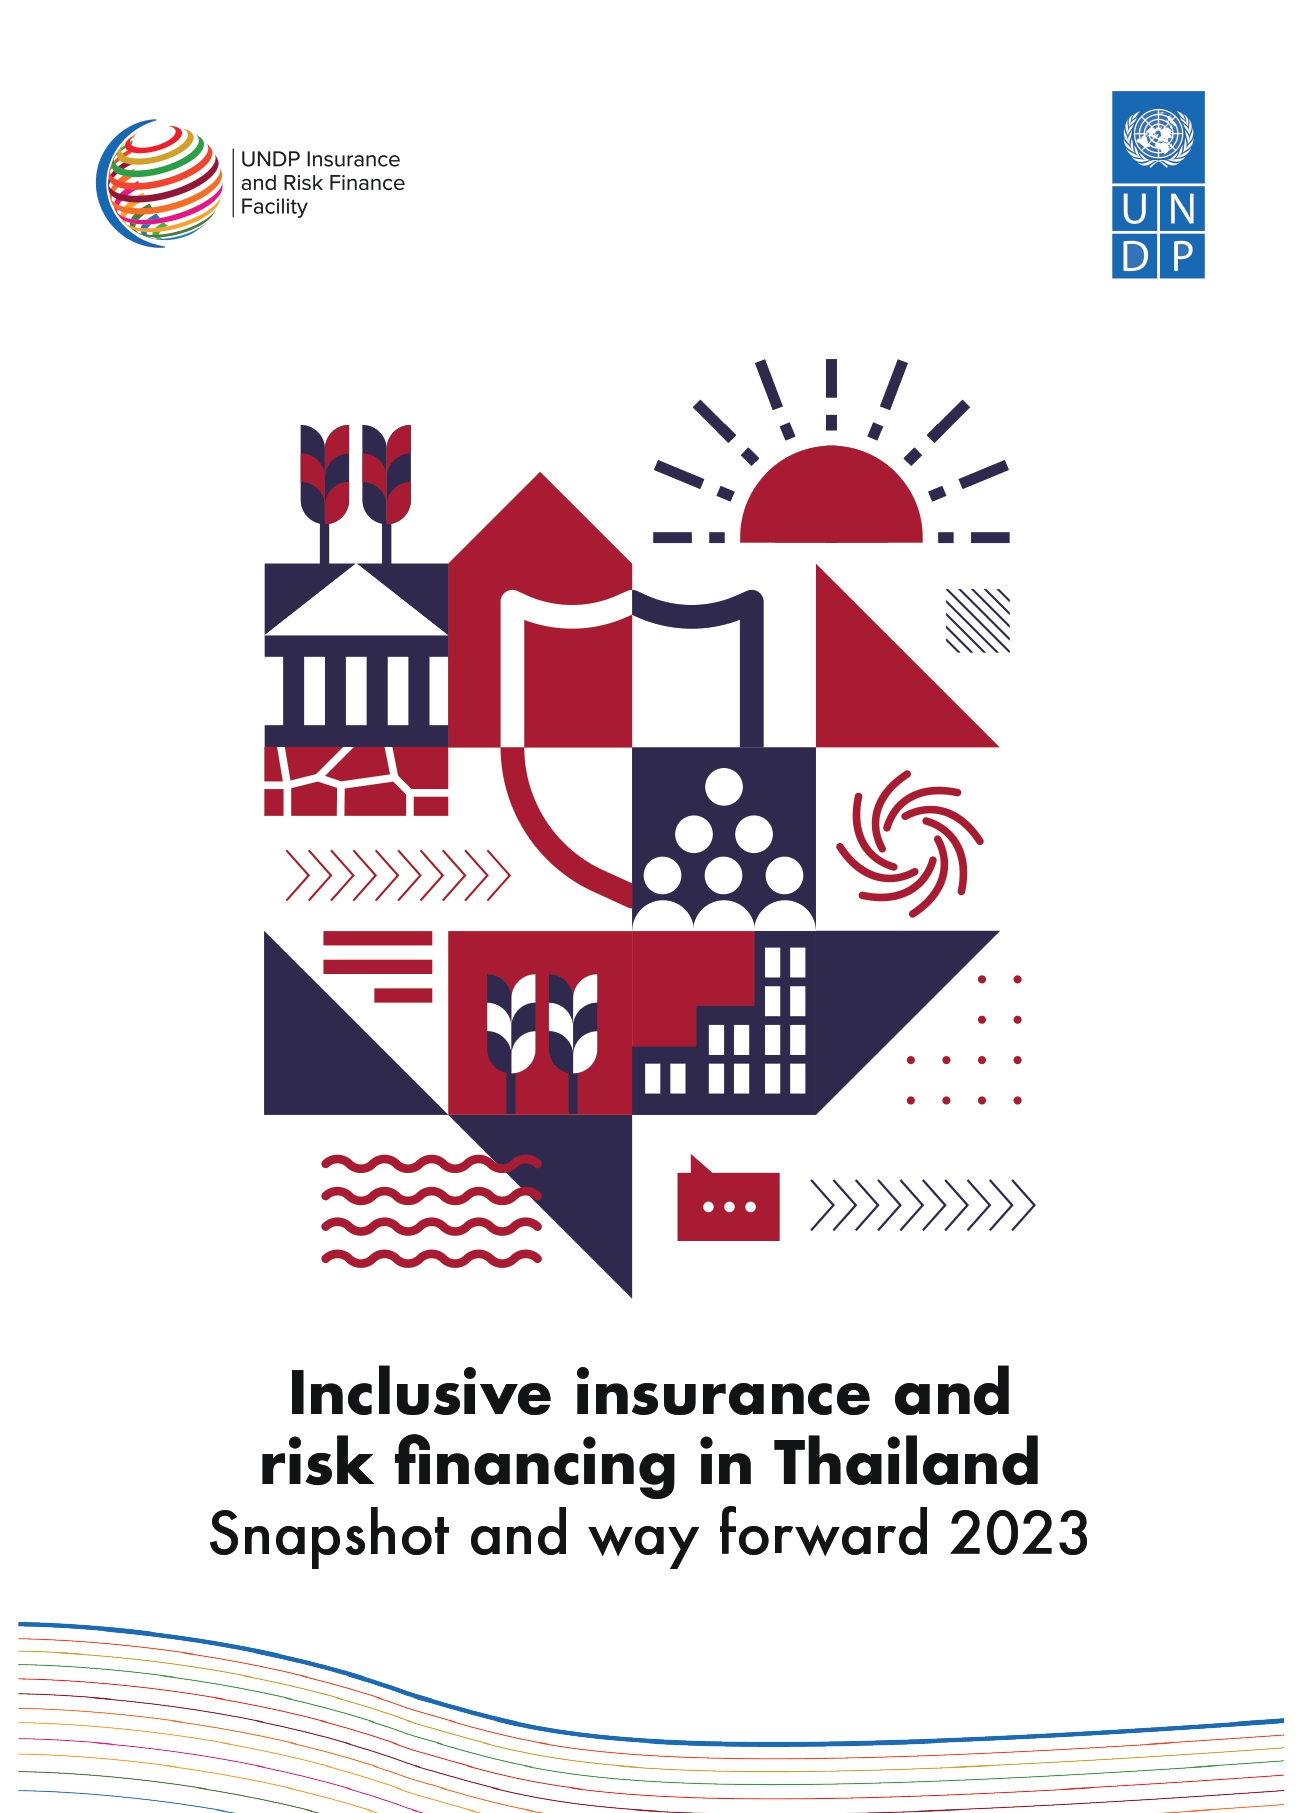 Inclusive insurance and risk financing in Thailand. Snapshot and way forward 2023